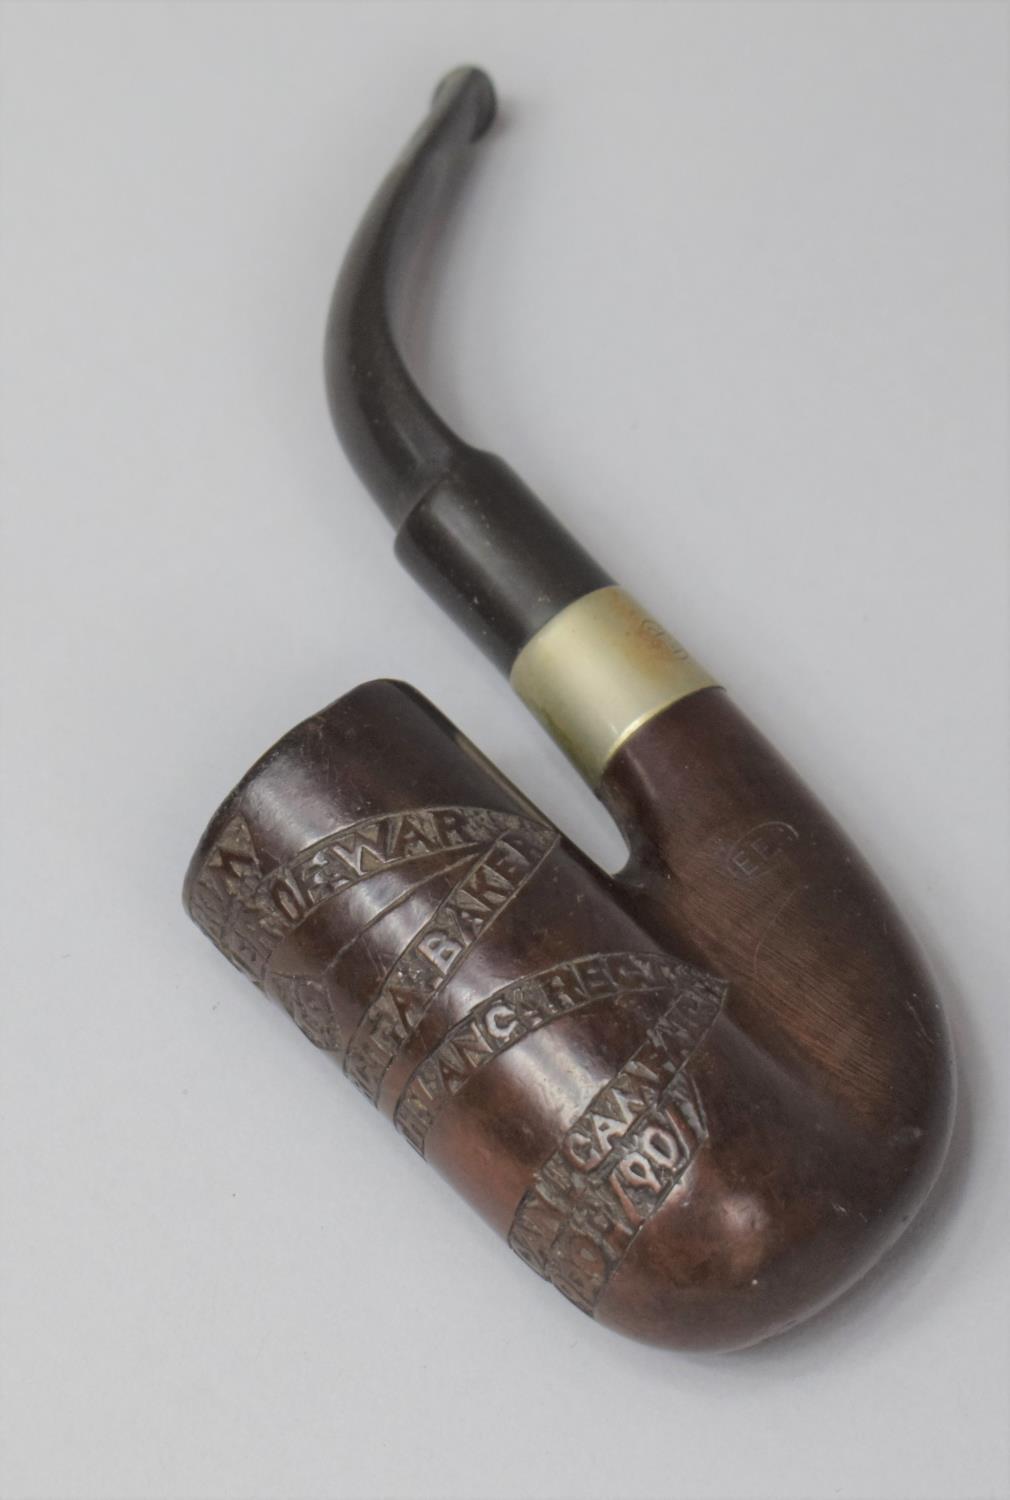 An Unusual Late 19th Century Prisoner of War Briar Pipe, the Bowl Inscribed "From Prisoner of War